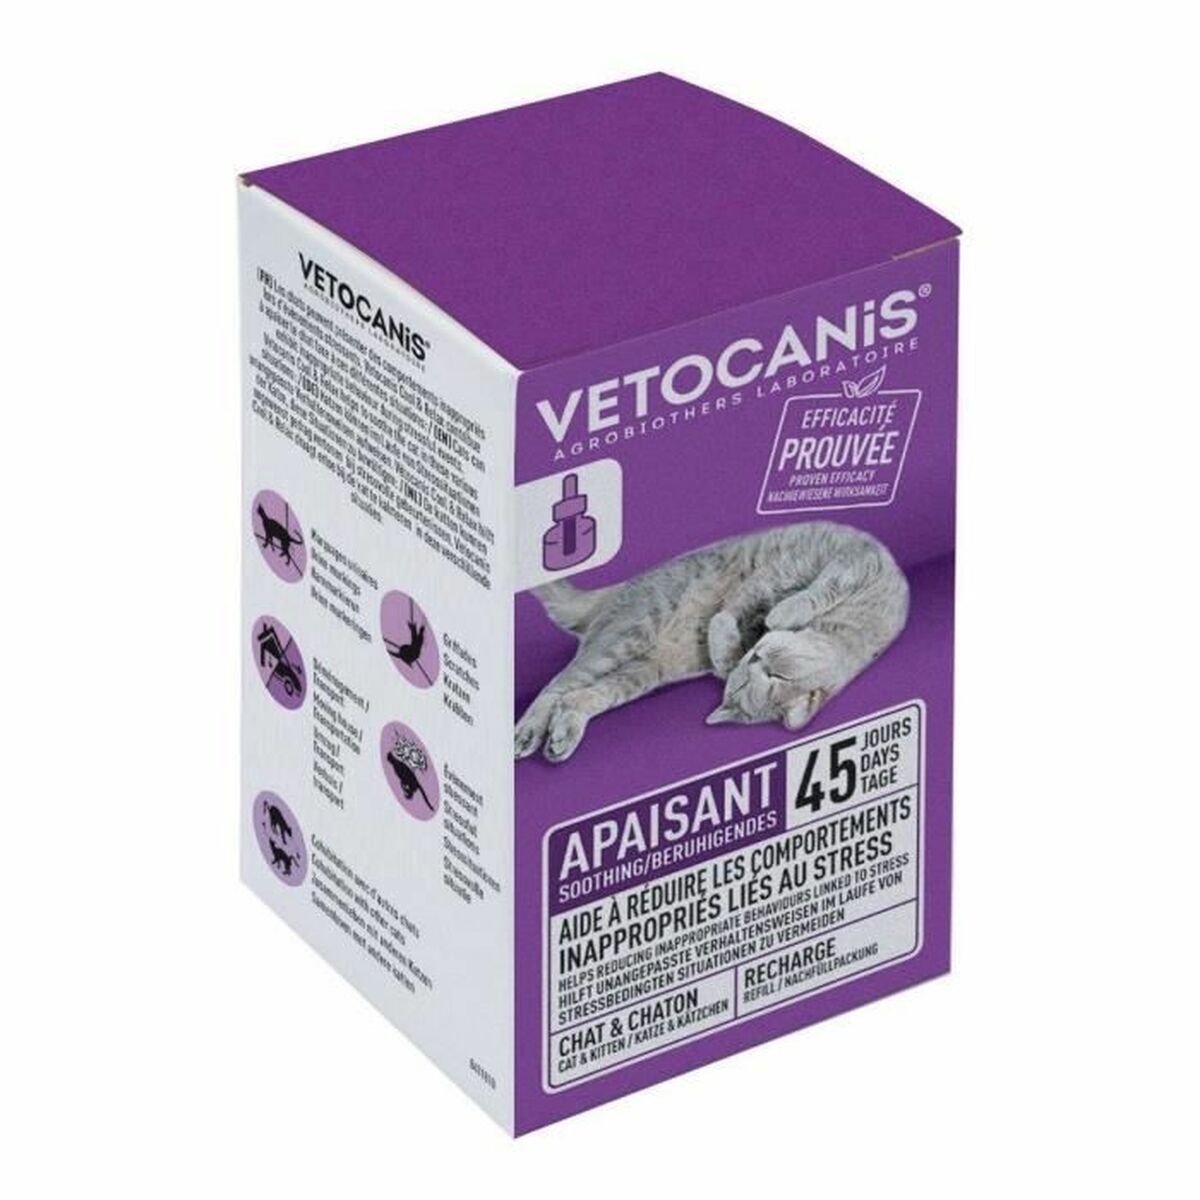 Replacement for Diffuser Vetocanis Relaxing